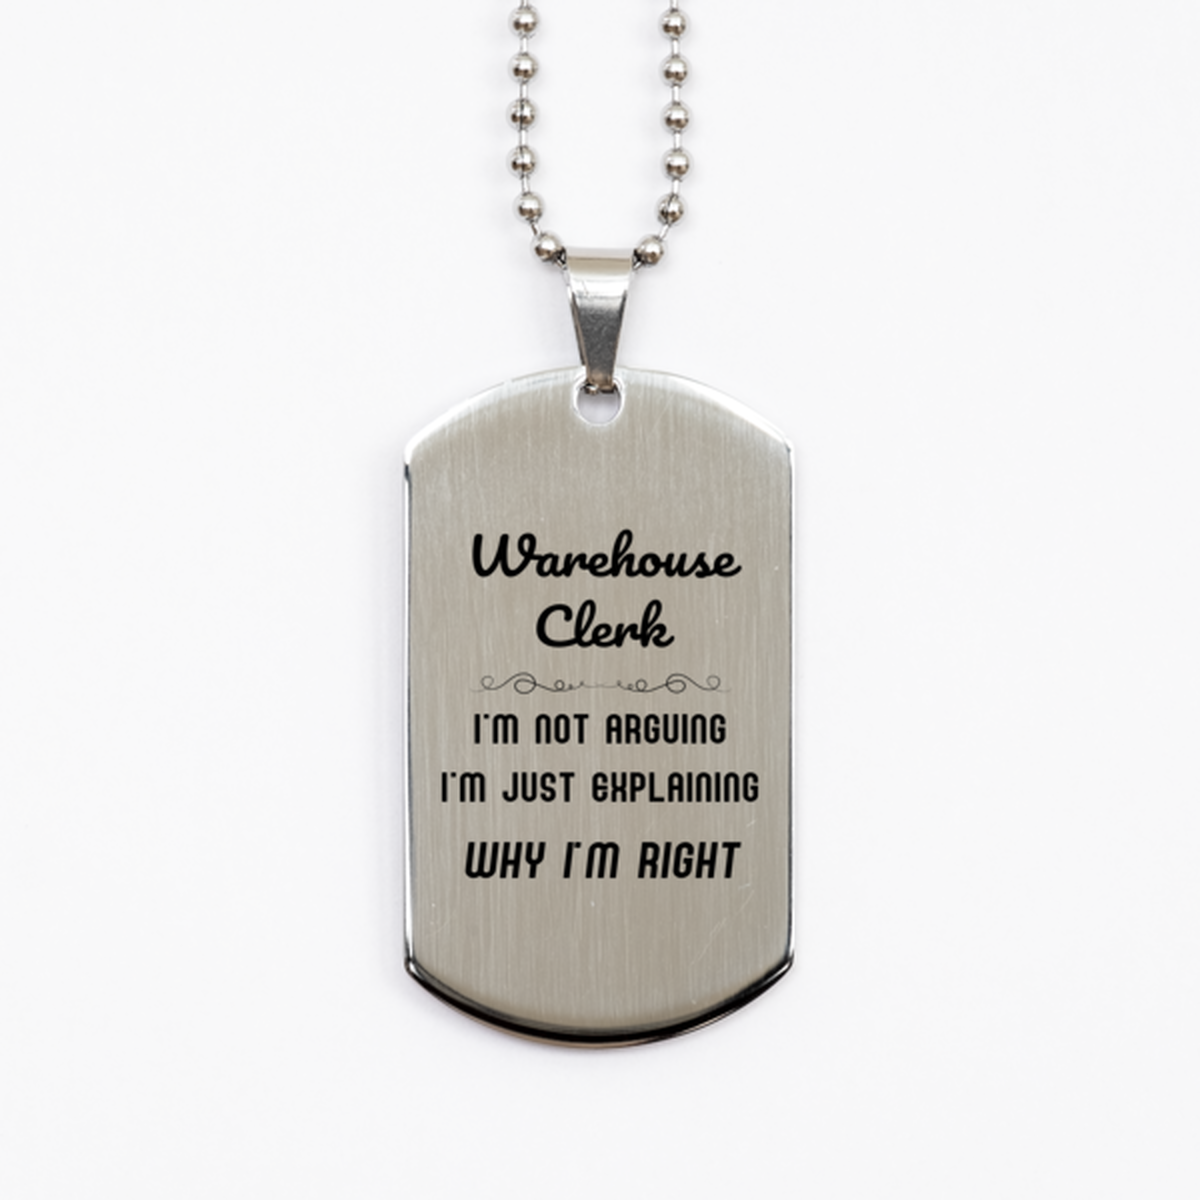 Warehouse Clerk I'm not Arguing. I'm Just Explaining Why I'm RIGHT Silver Dog Tag, Funny Saying Quote Warehouse Clerk Gifts For Warehouse Clerk Graduation Birthday Christmas Gifts for Men Women Coworker